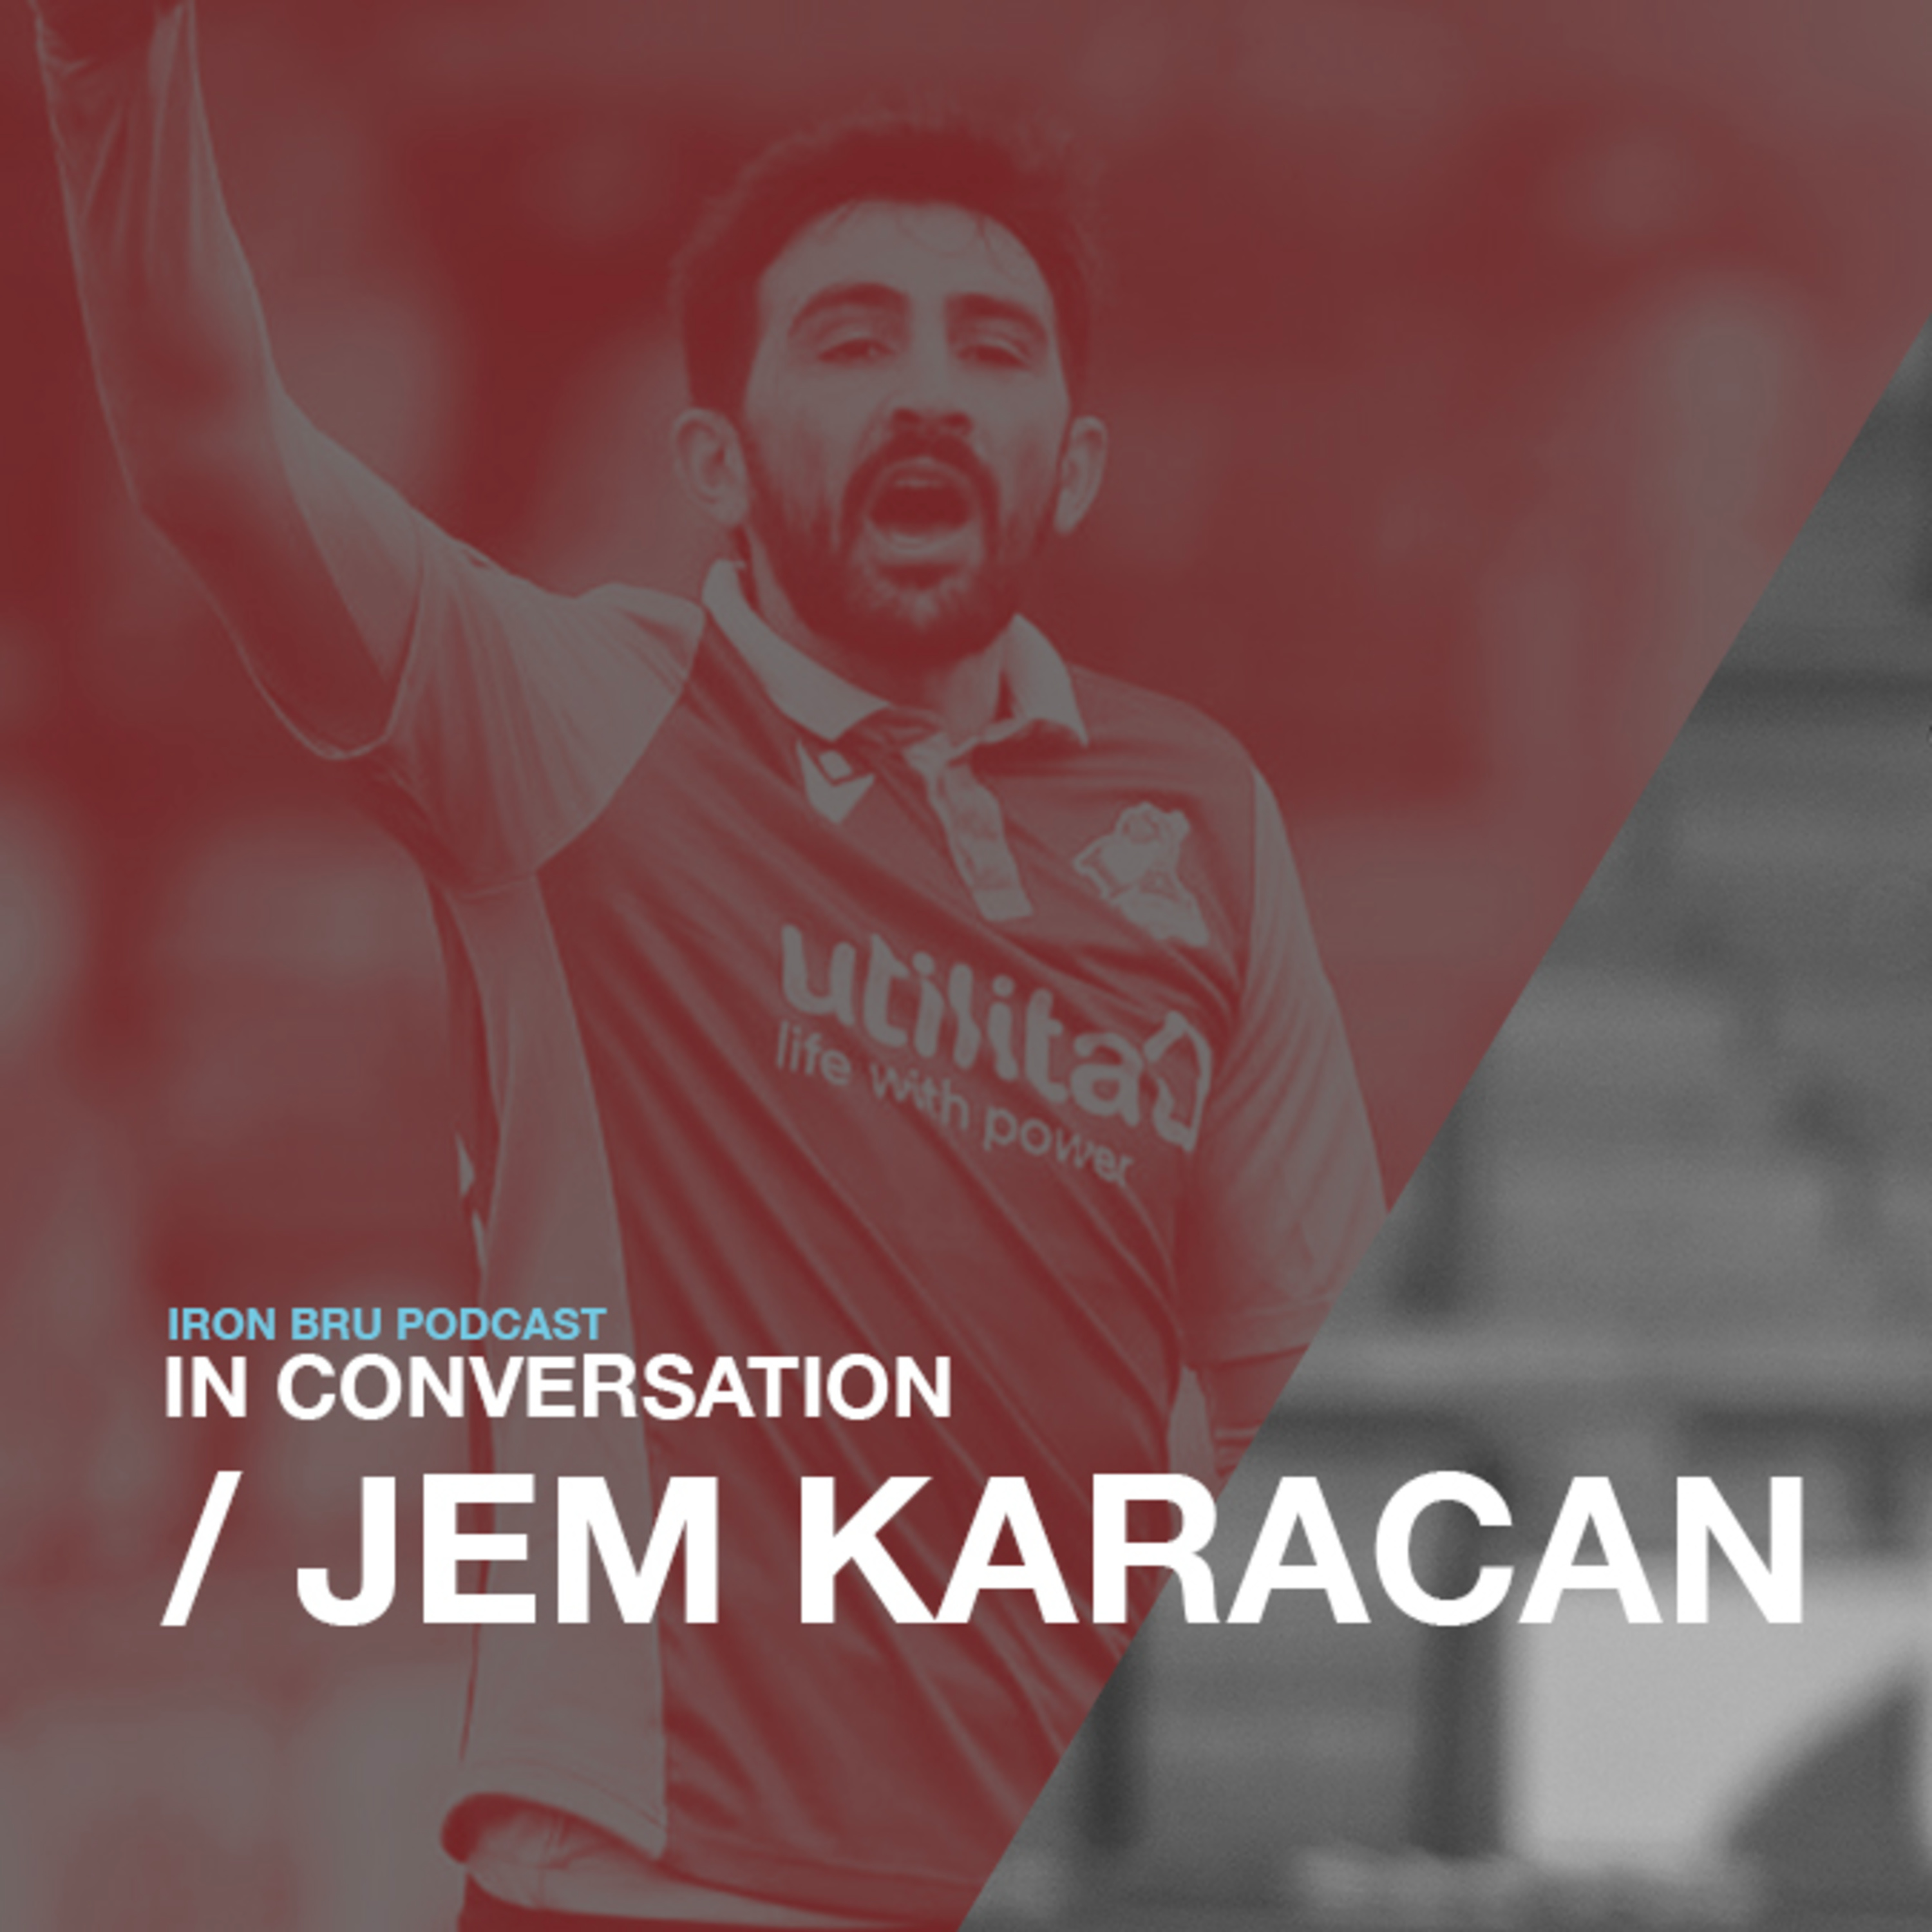 In conversation with Jem Karacan